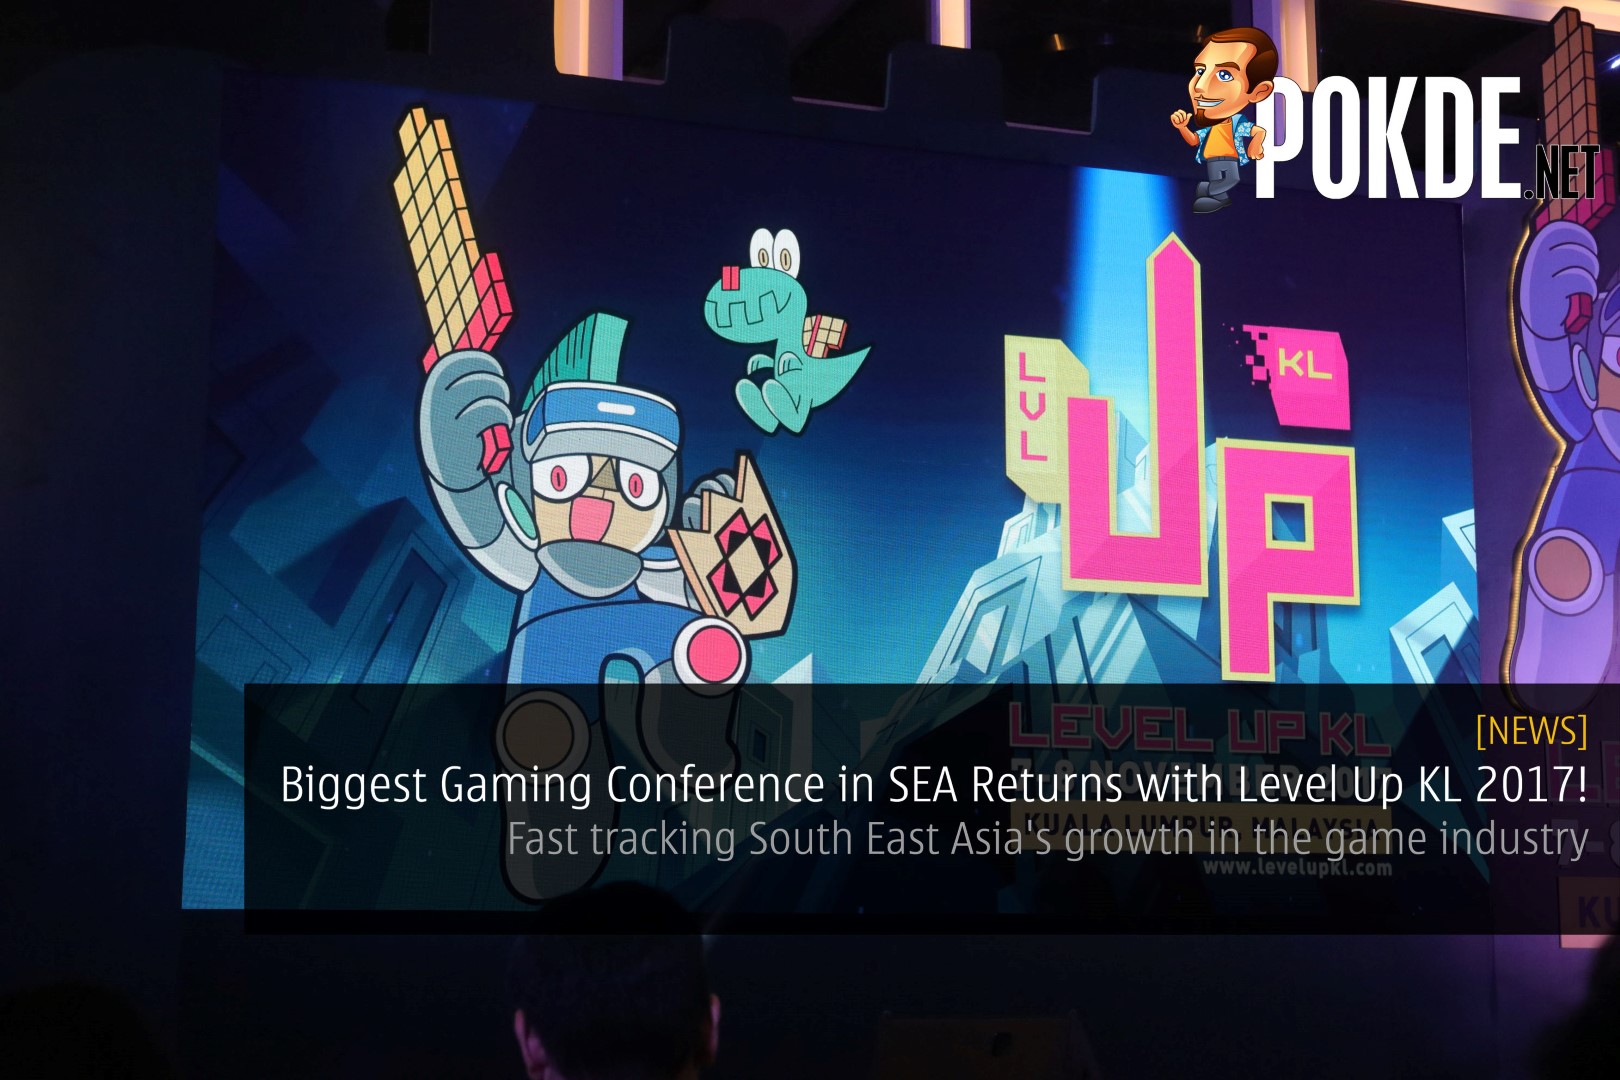 Biggest Gaming Conference in SEA Returns with Level Up KL 2017! - Fast tracking South East Asia's growth in the game industry 32